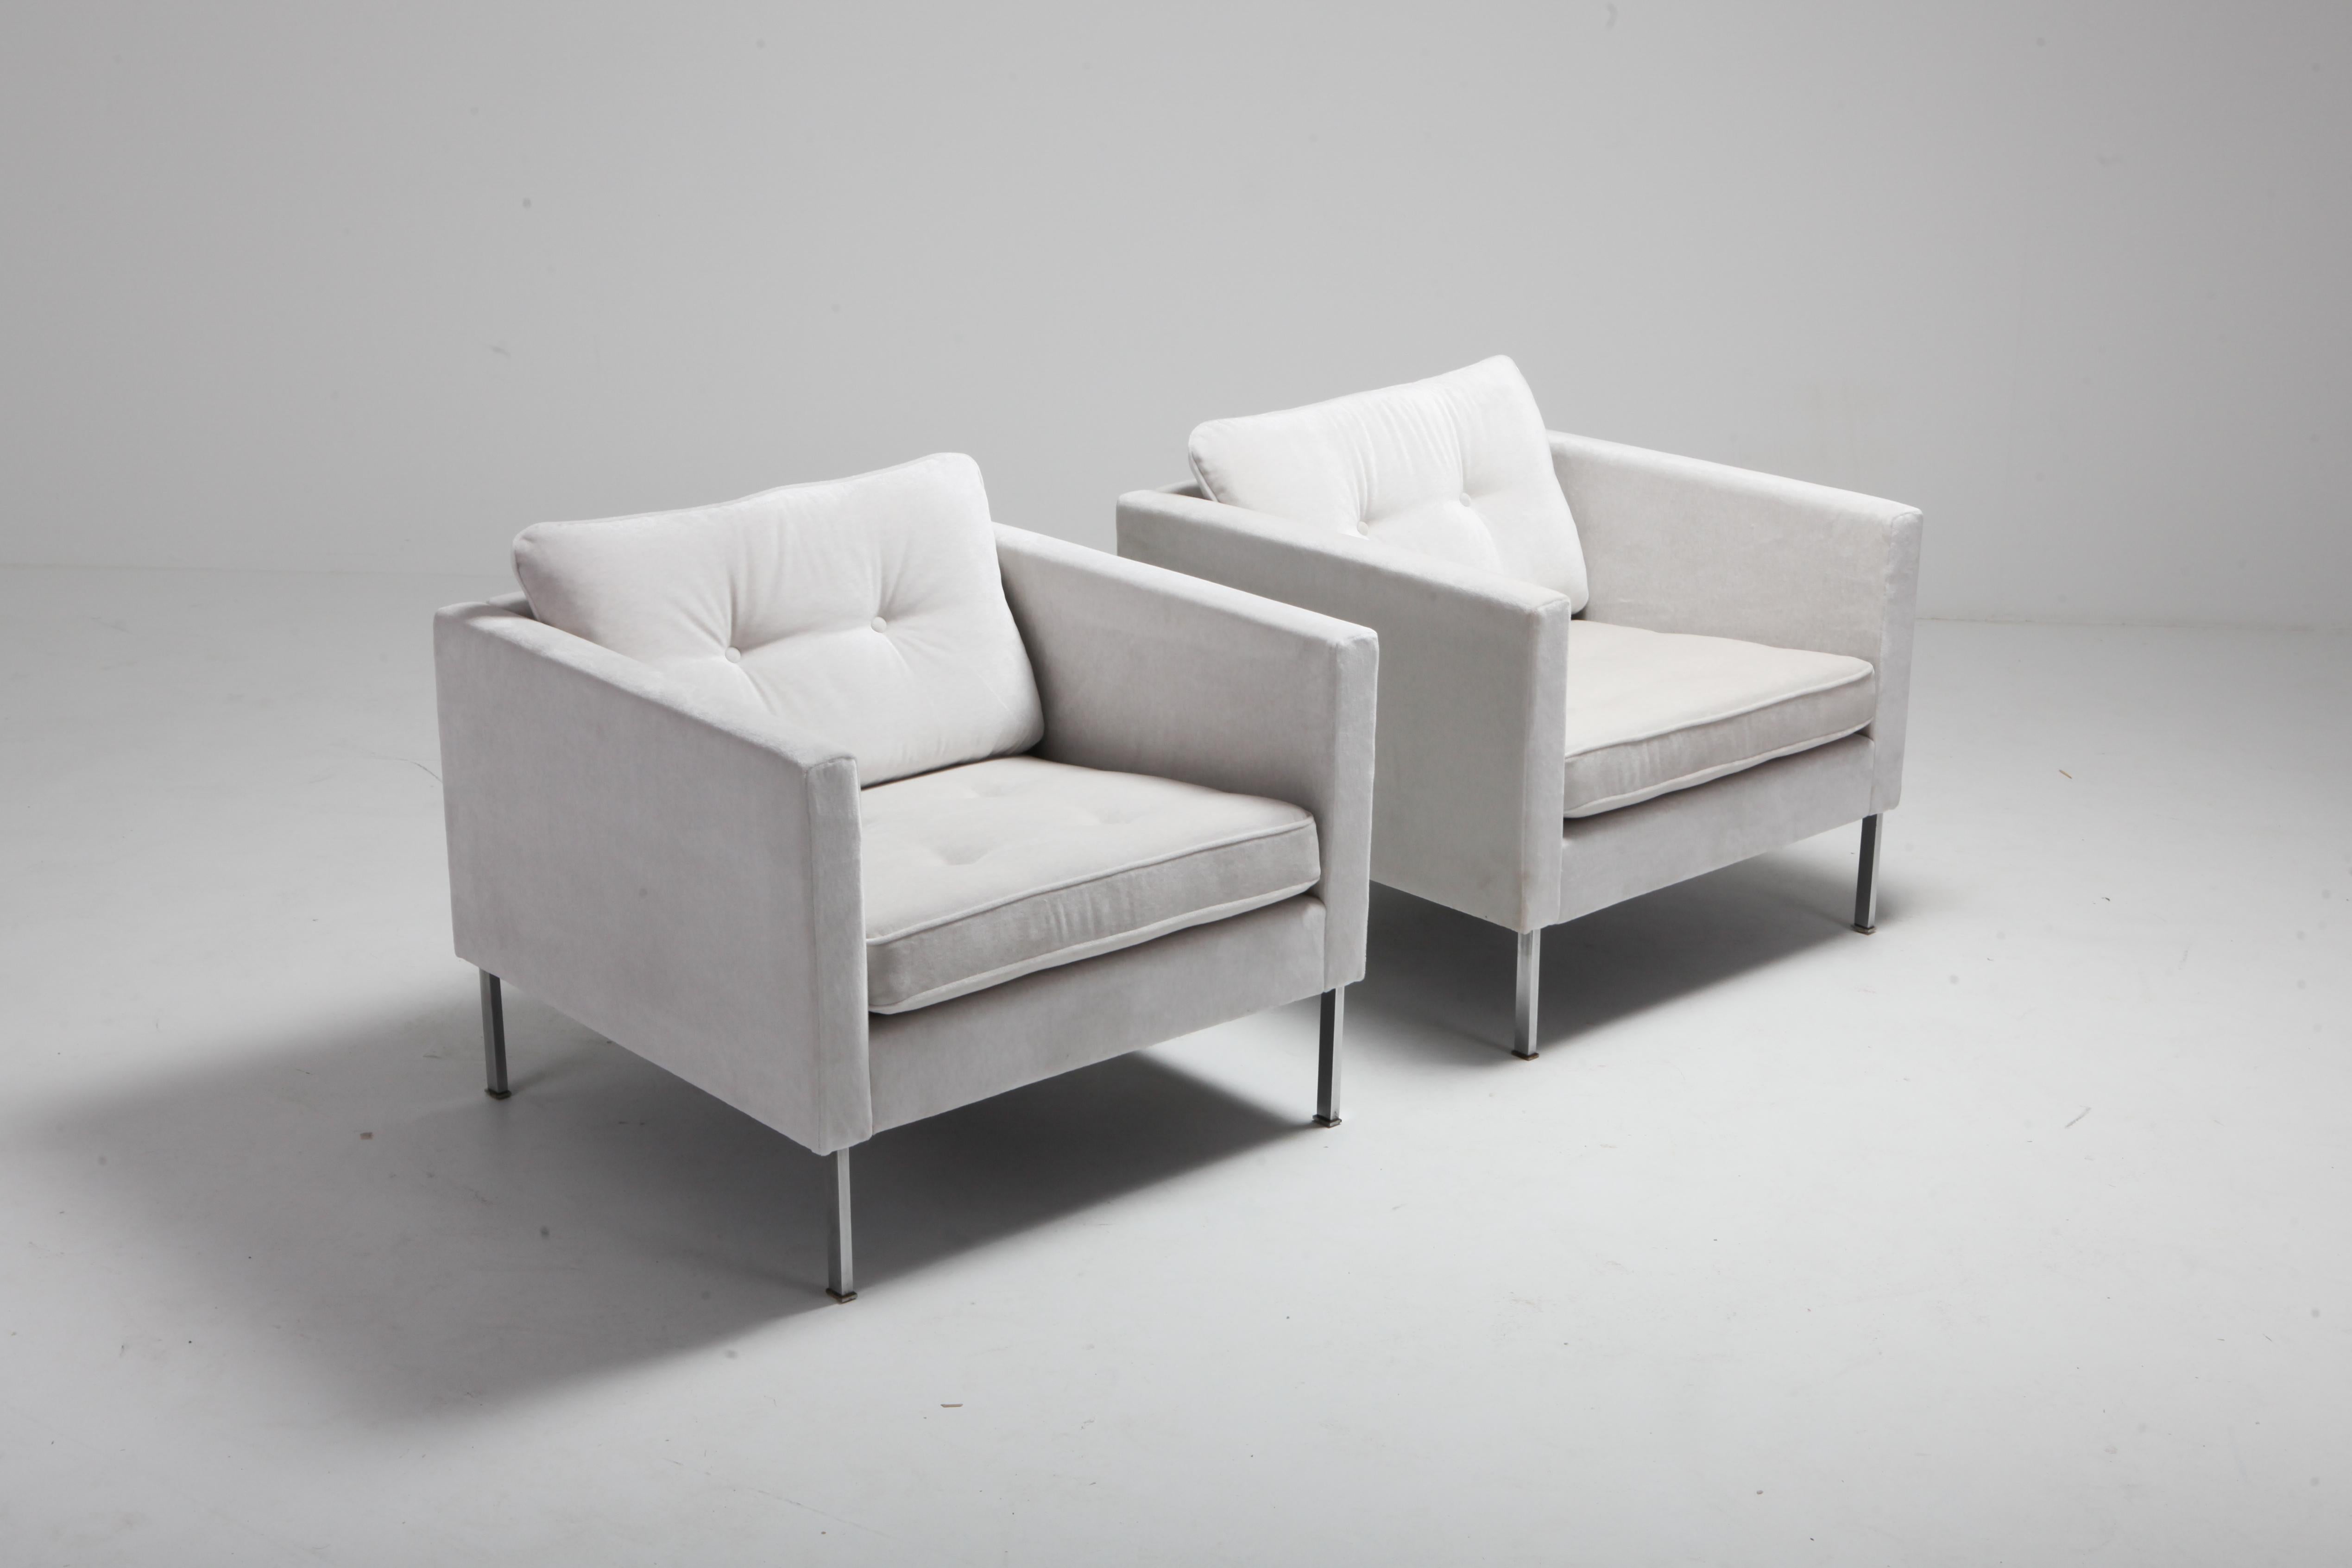 Artifort 446 lounge chairs designed by Pierre Paulin and manufactured in Holland, 1962. The chairs have been newly upholstered in off-white / light grey velvet. The chairs have solid steel legs, chrome-plated. This is an extremely rare and very